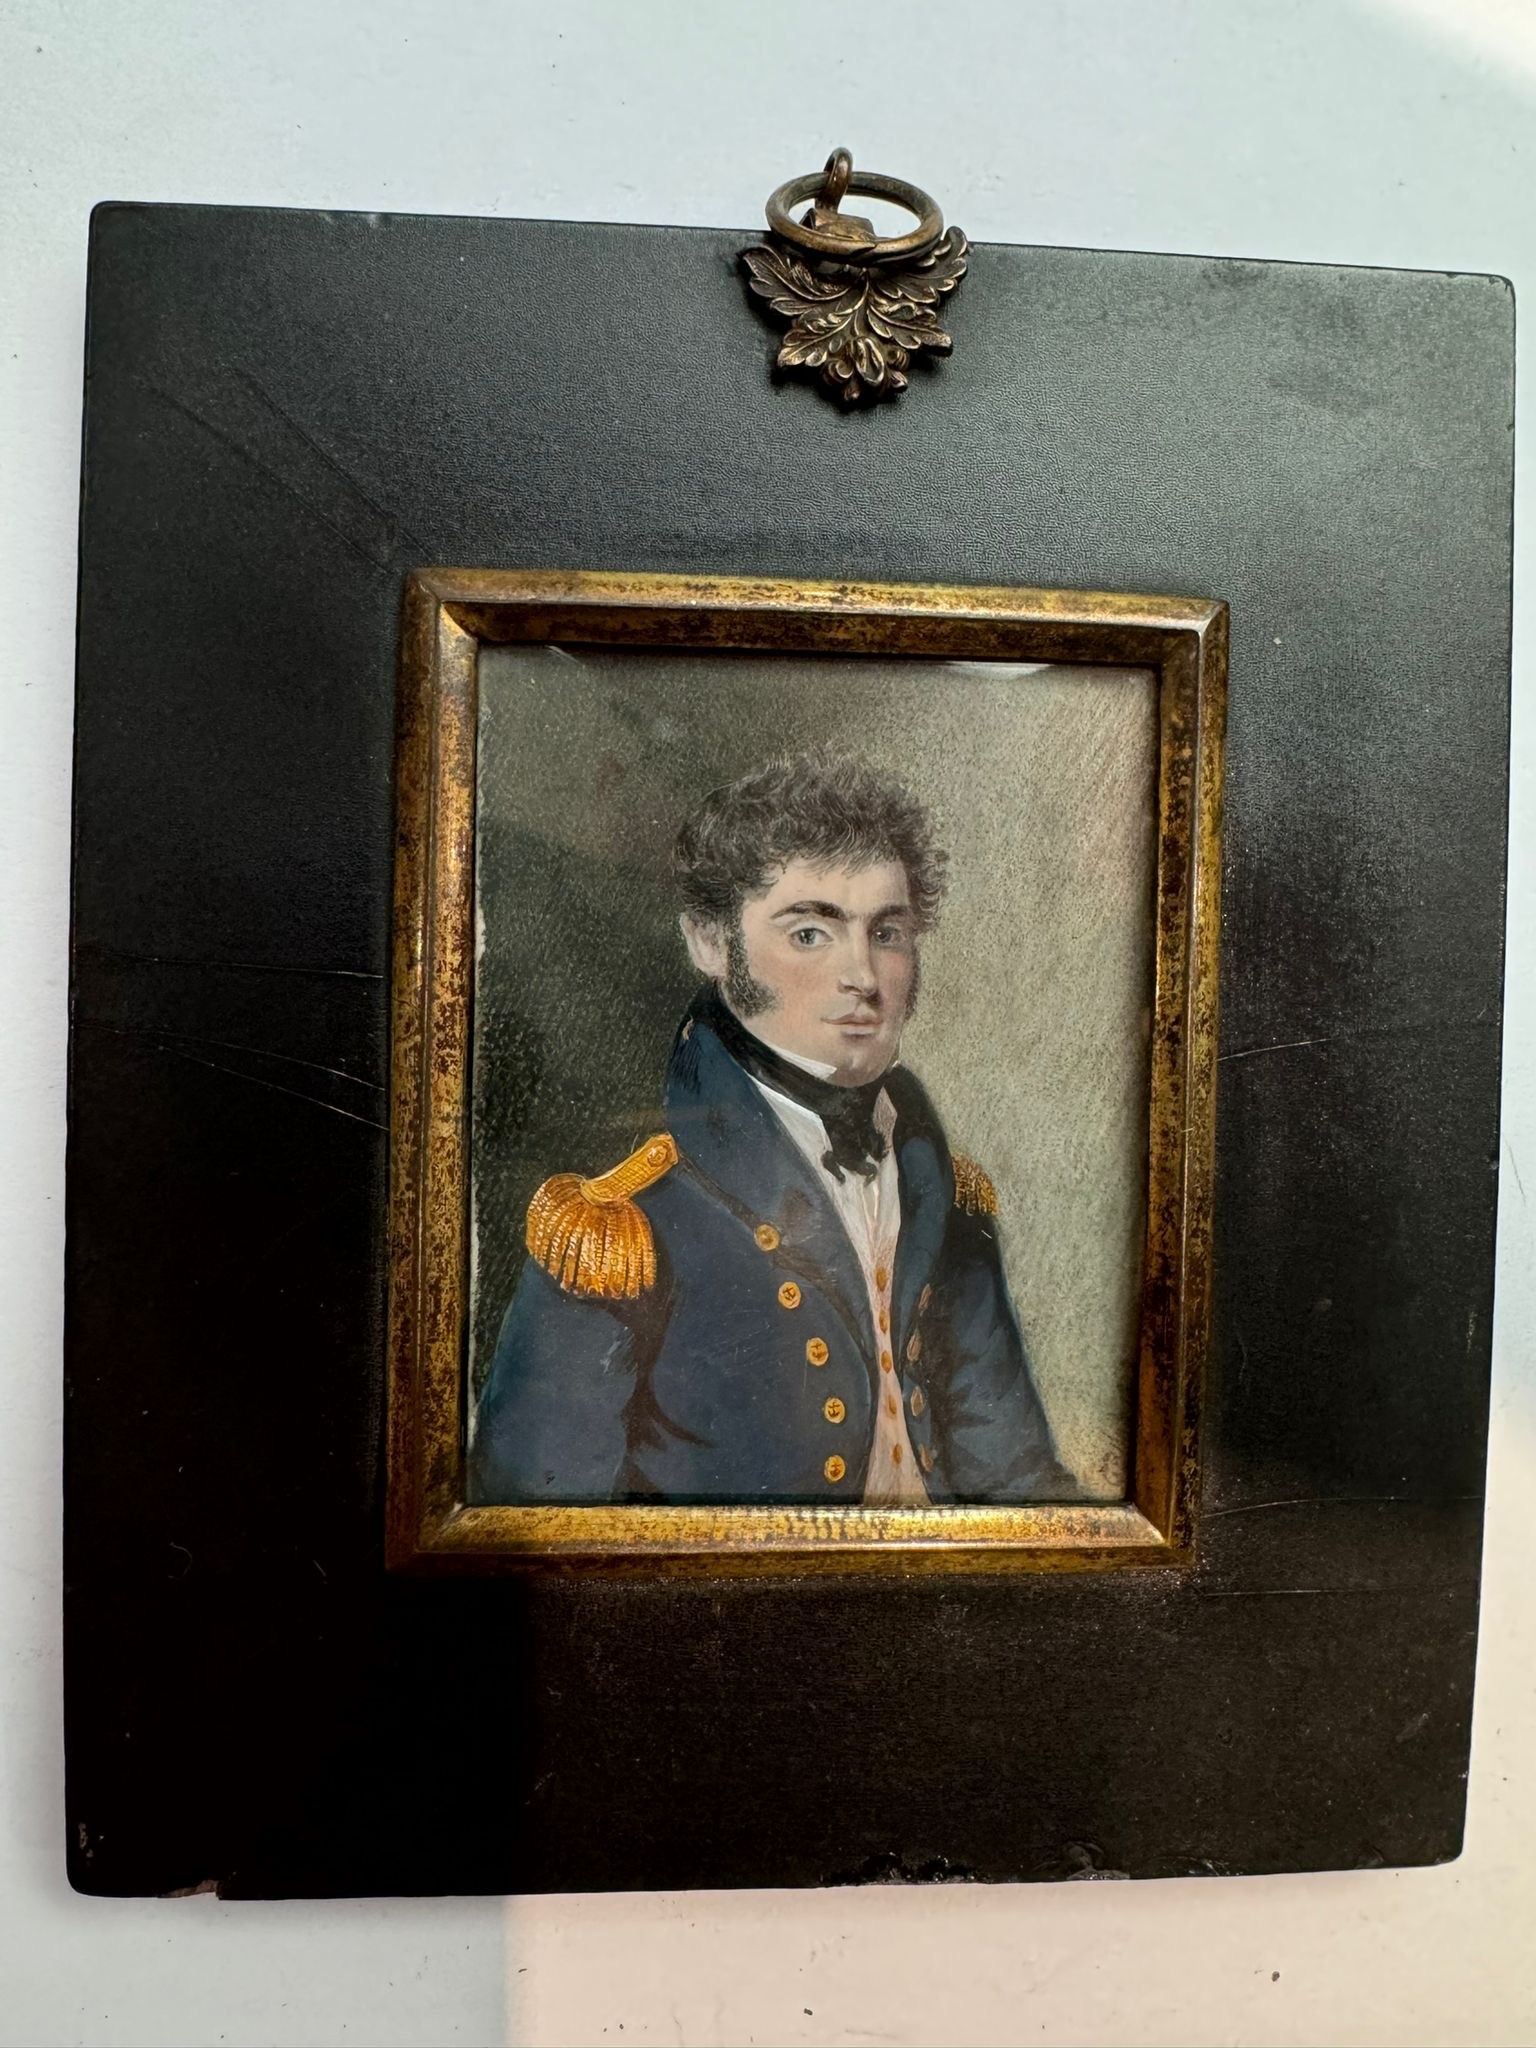 An early 19th century portrait miniature of a Senior Naval Officer, with medium length wavy black